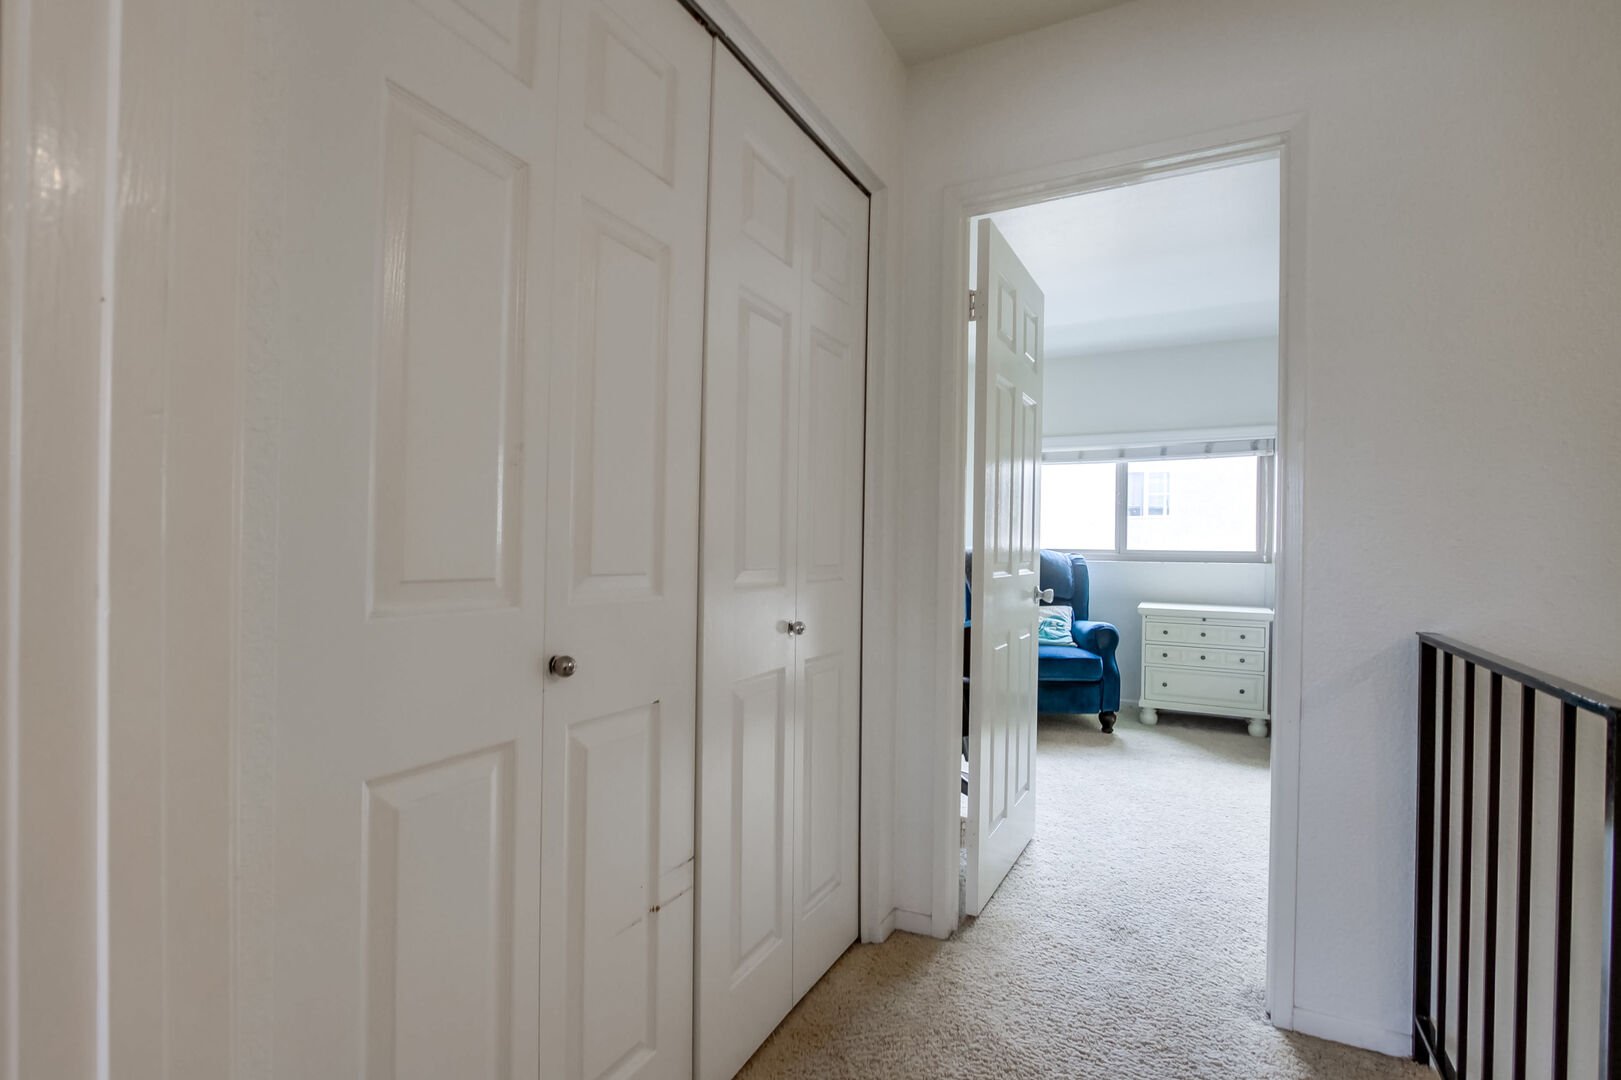 Upstairs hallway with washer and dryer closet in between dual master bedrooms